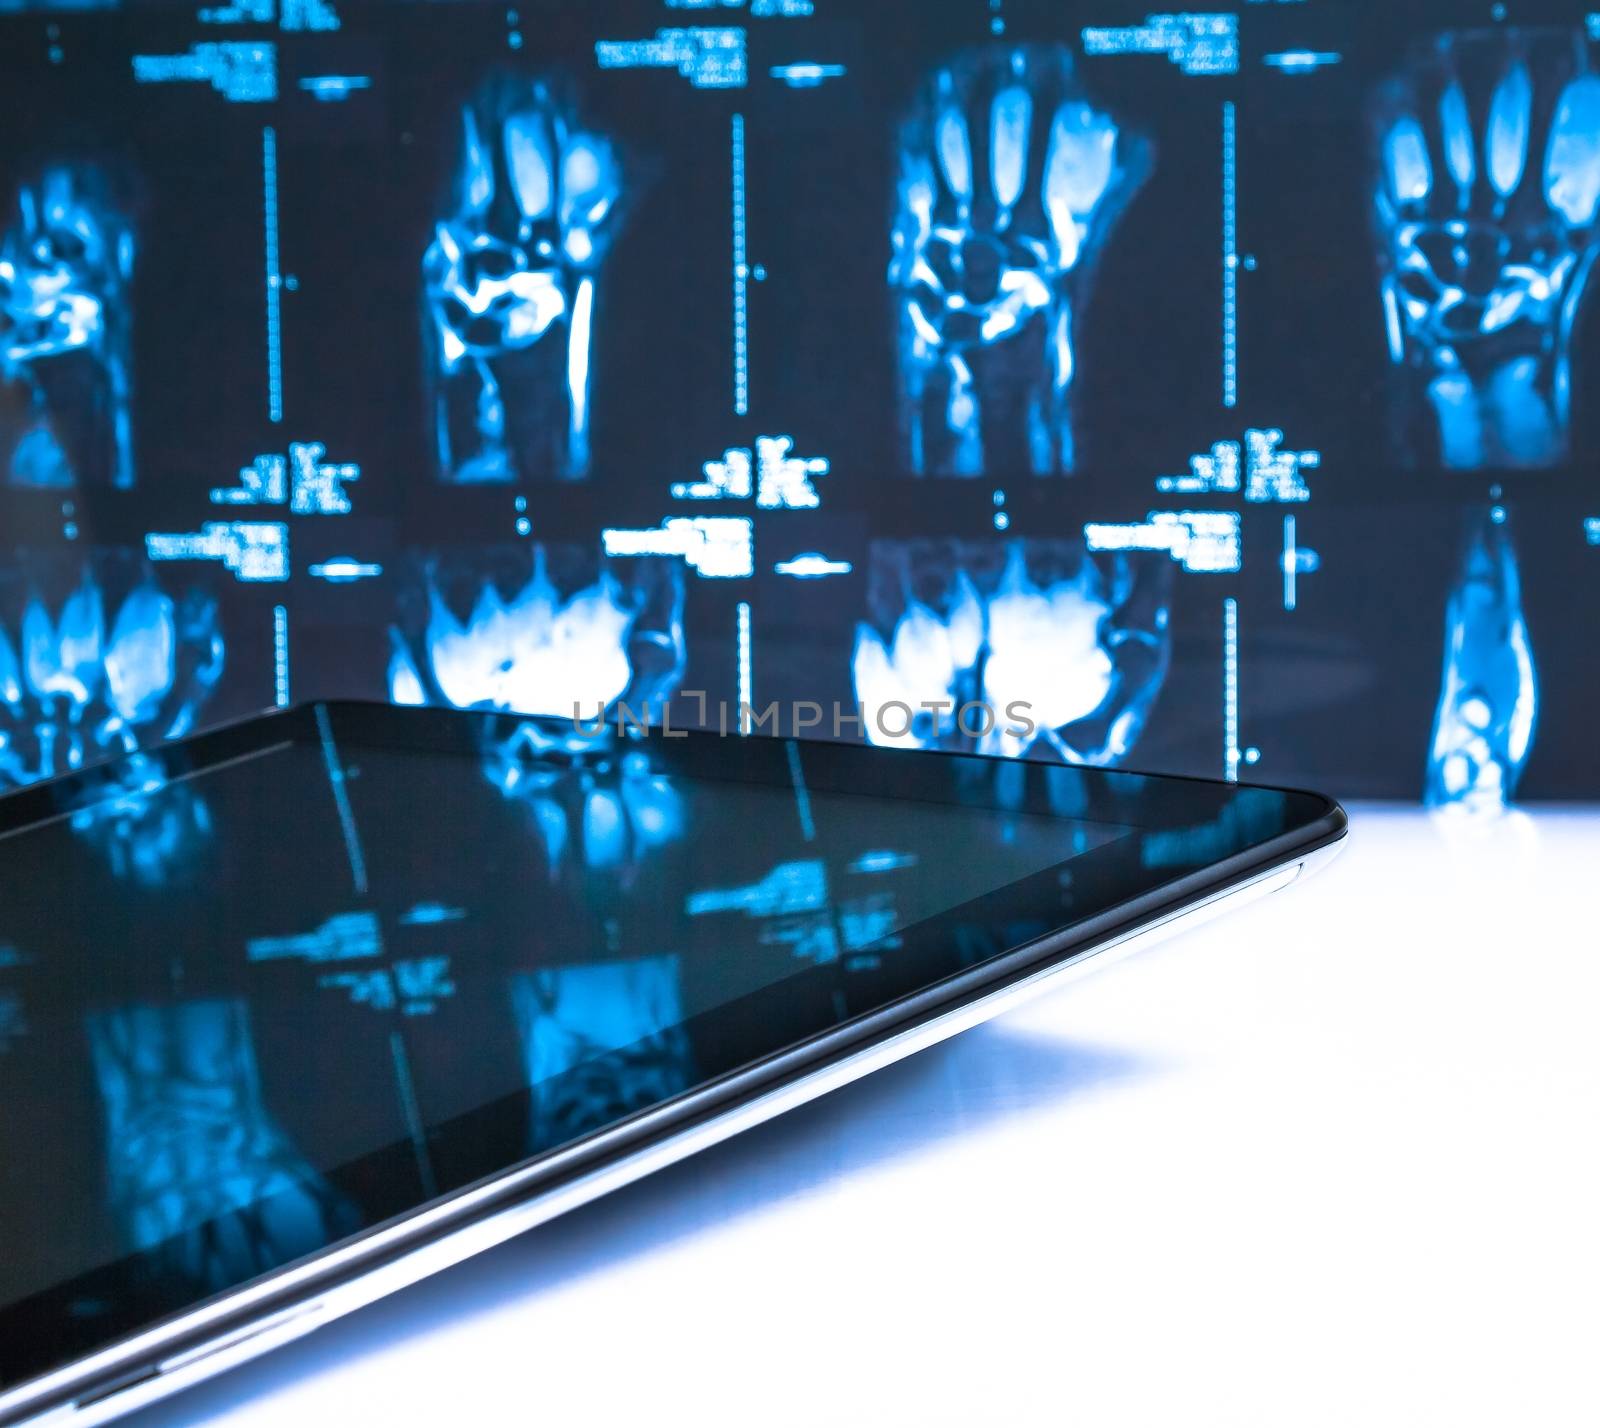 modern digital tablet pc in laboratory on x-ray images background by donfiore